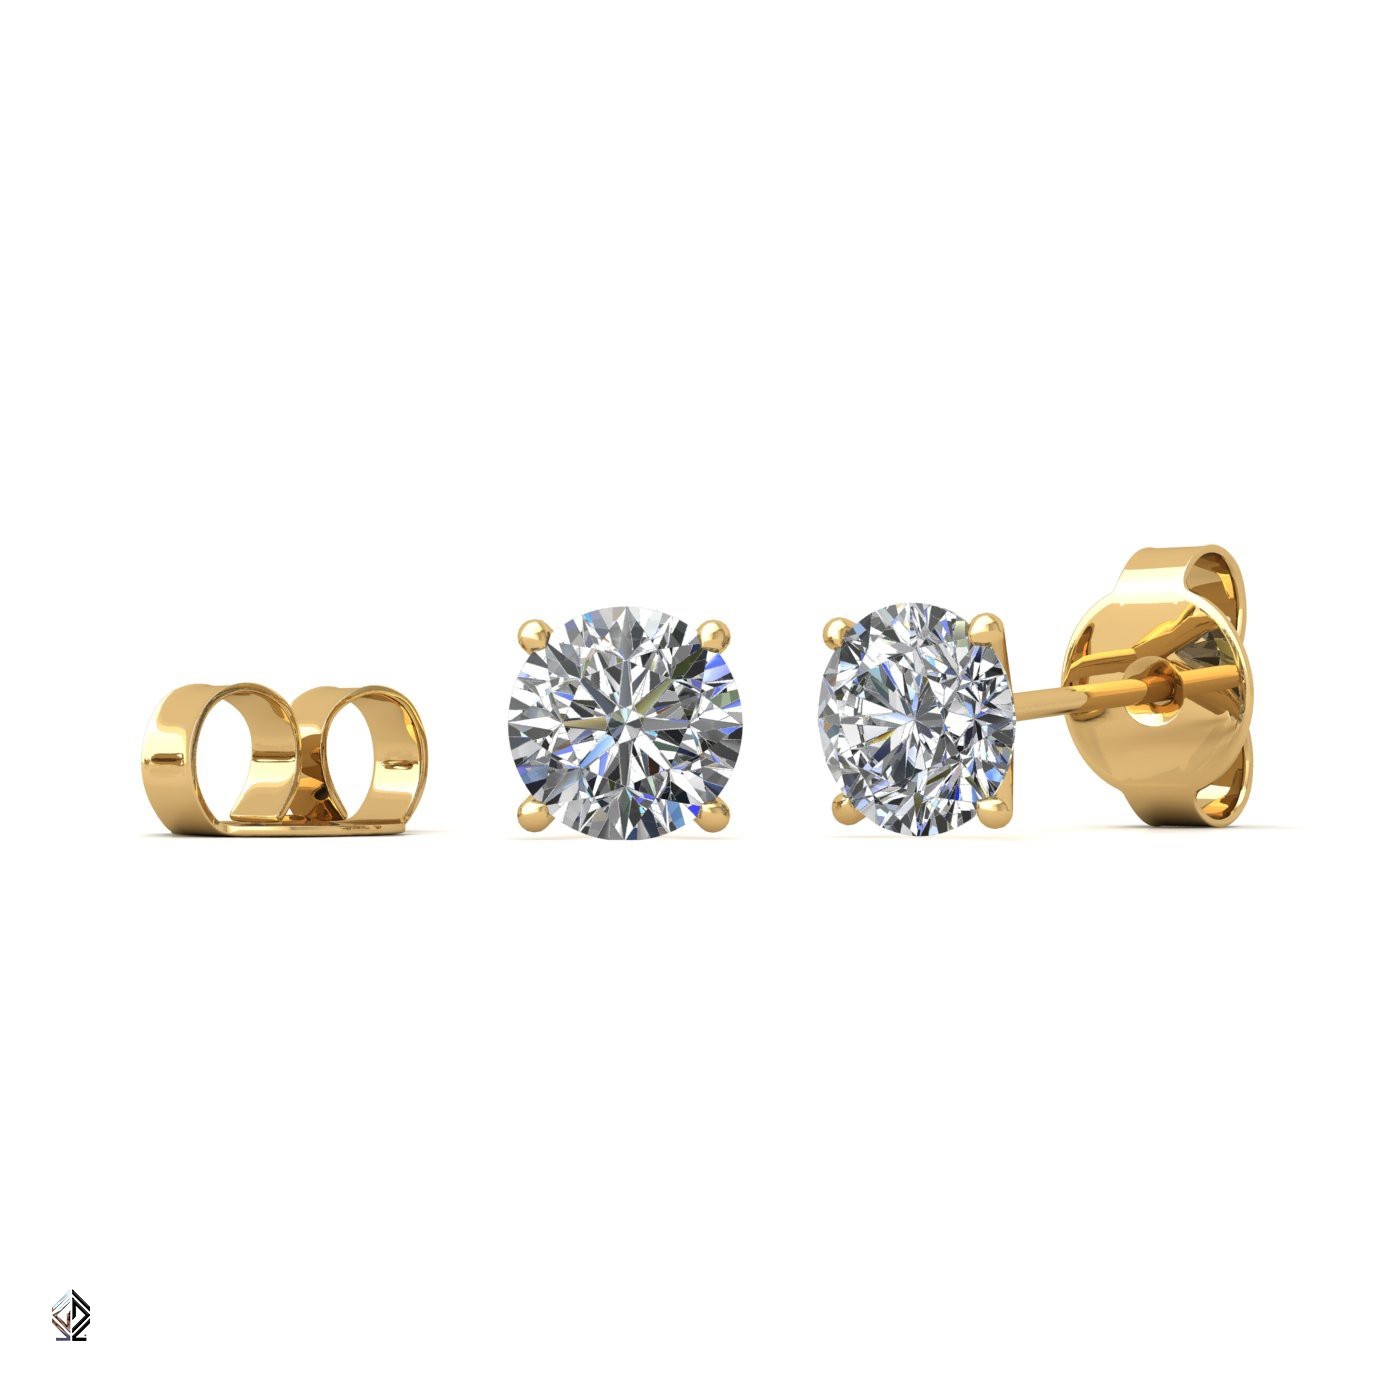 18k yellow gold 1.5 ct each (3,0 tcw) 4 prongs round cut classic diamond earring studs Photos & images